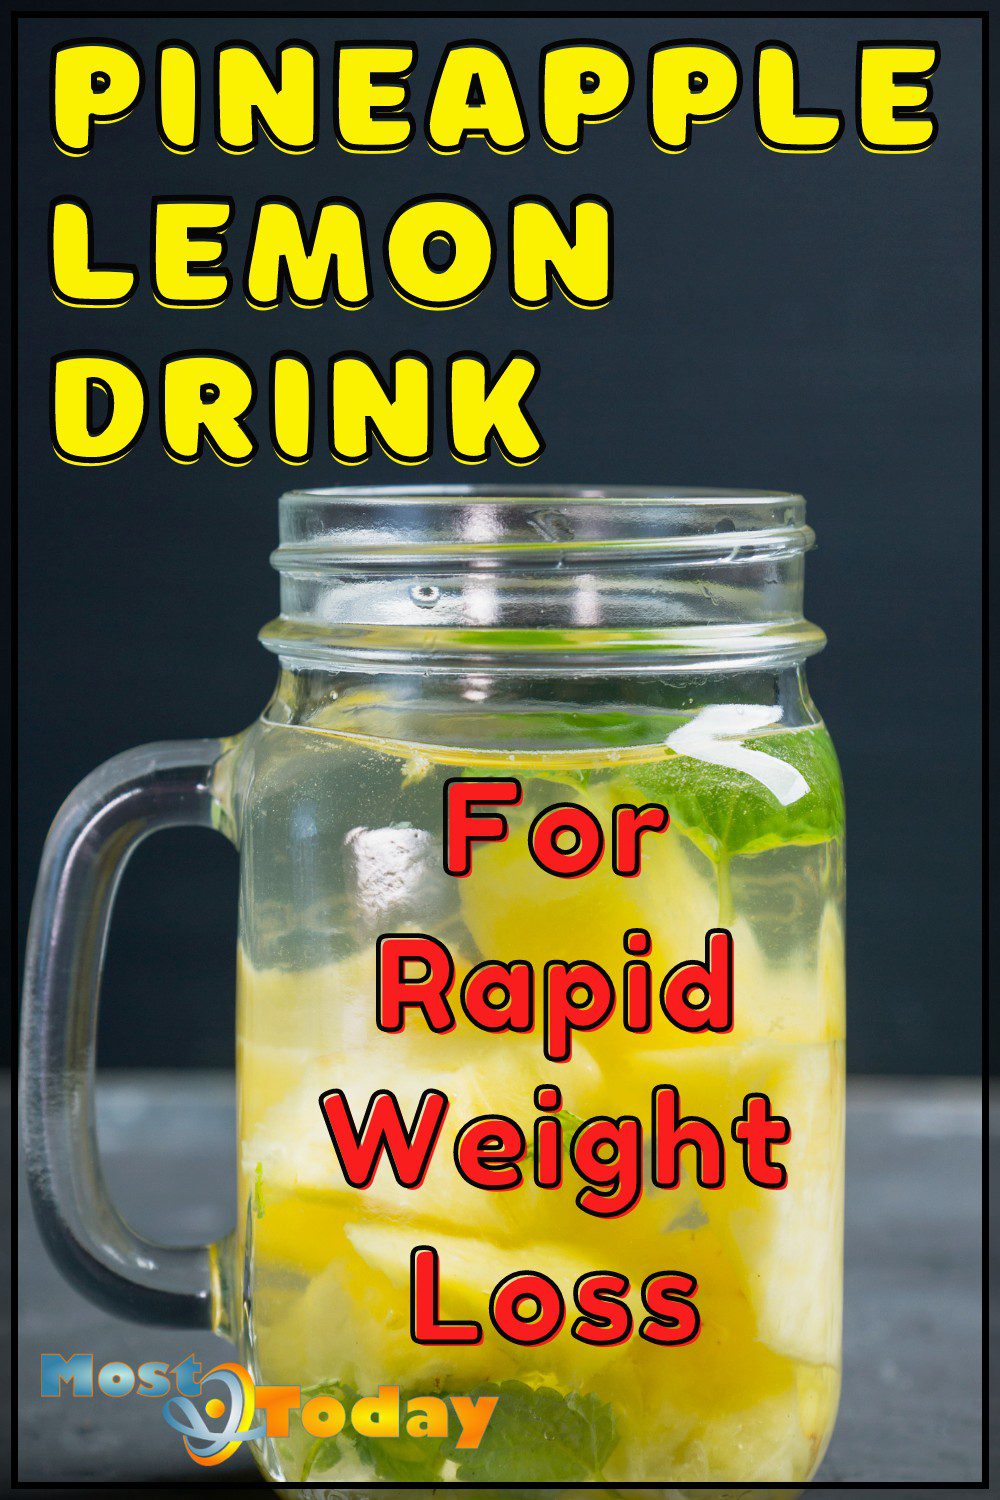 Pineapple Lemon Drink The Quick And Easy Way To Rapid Weight Loss